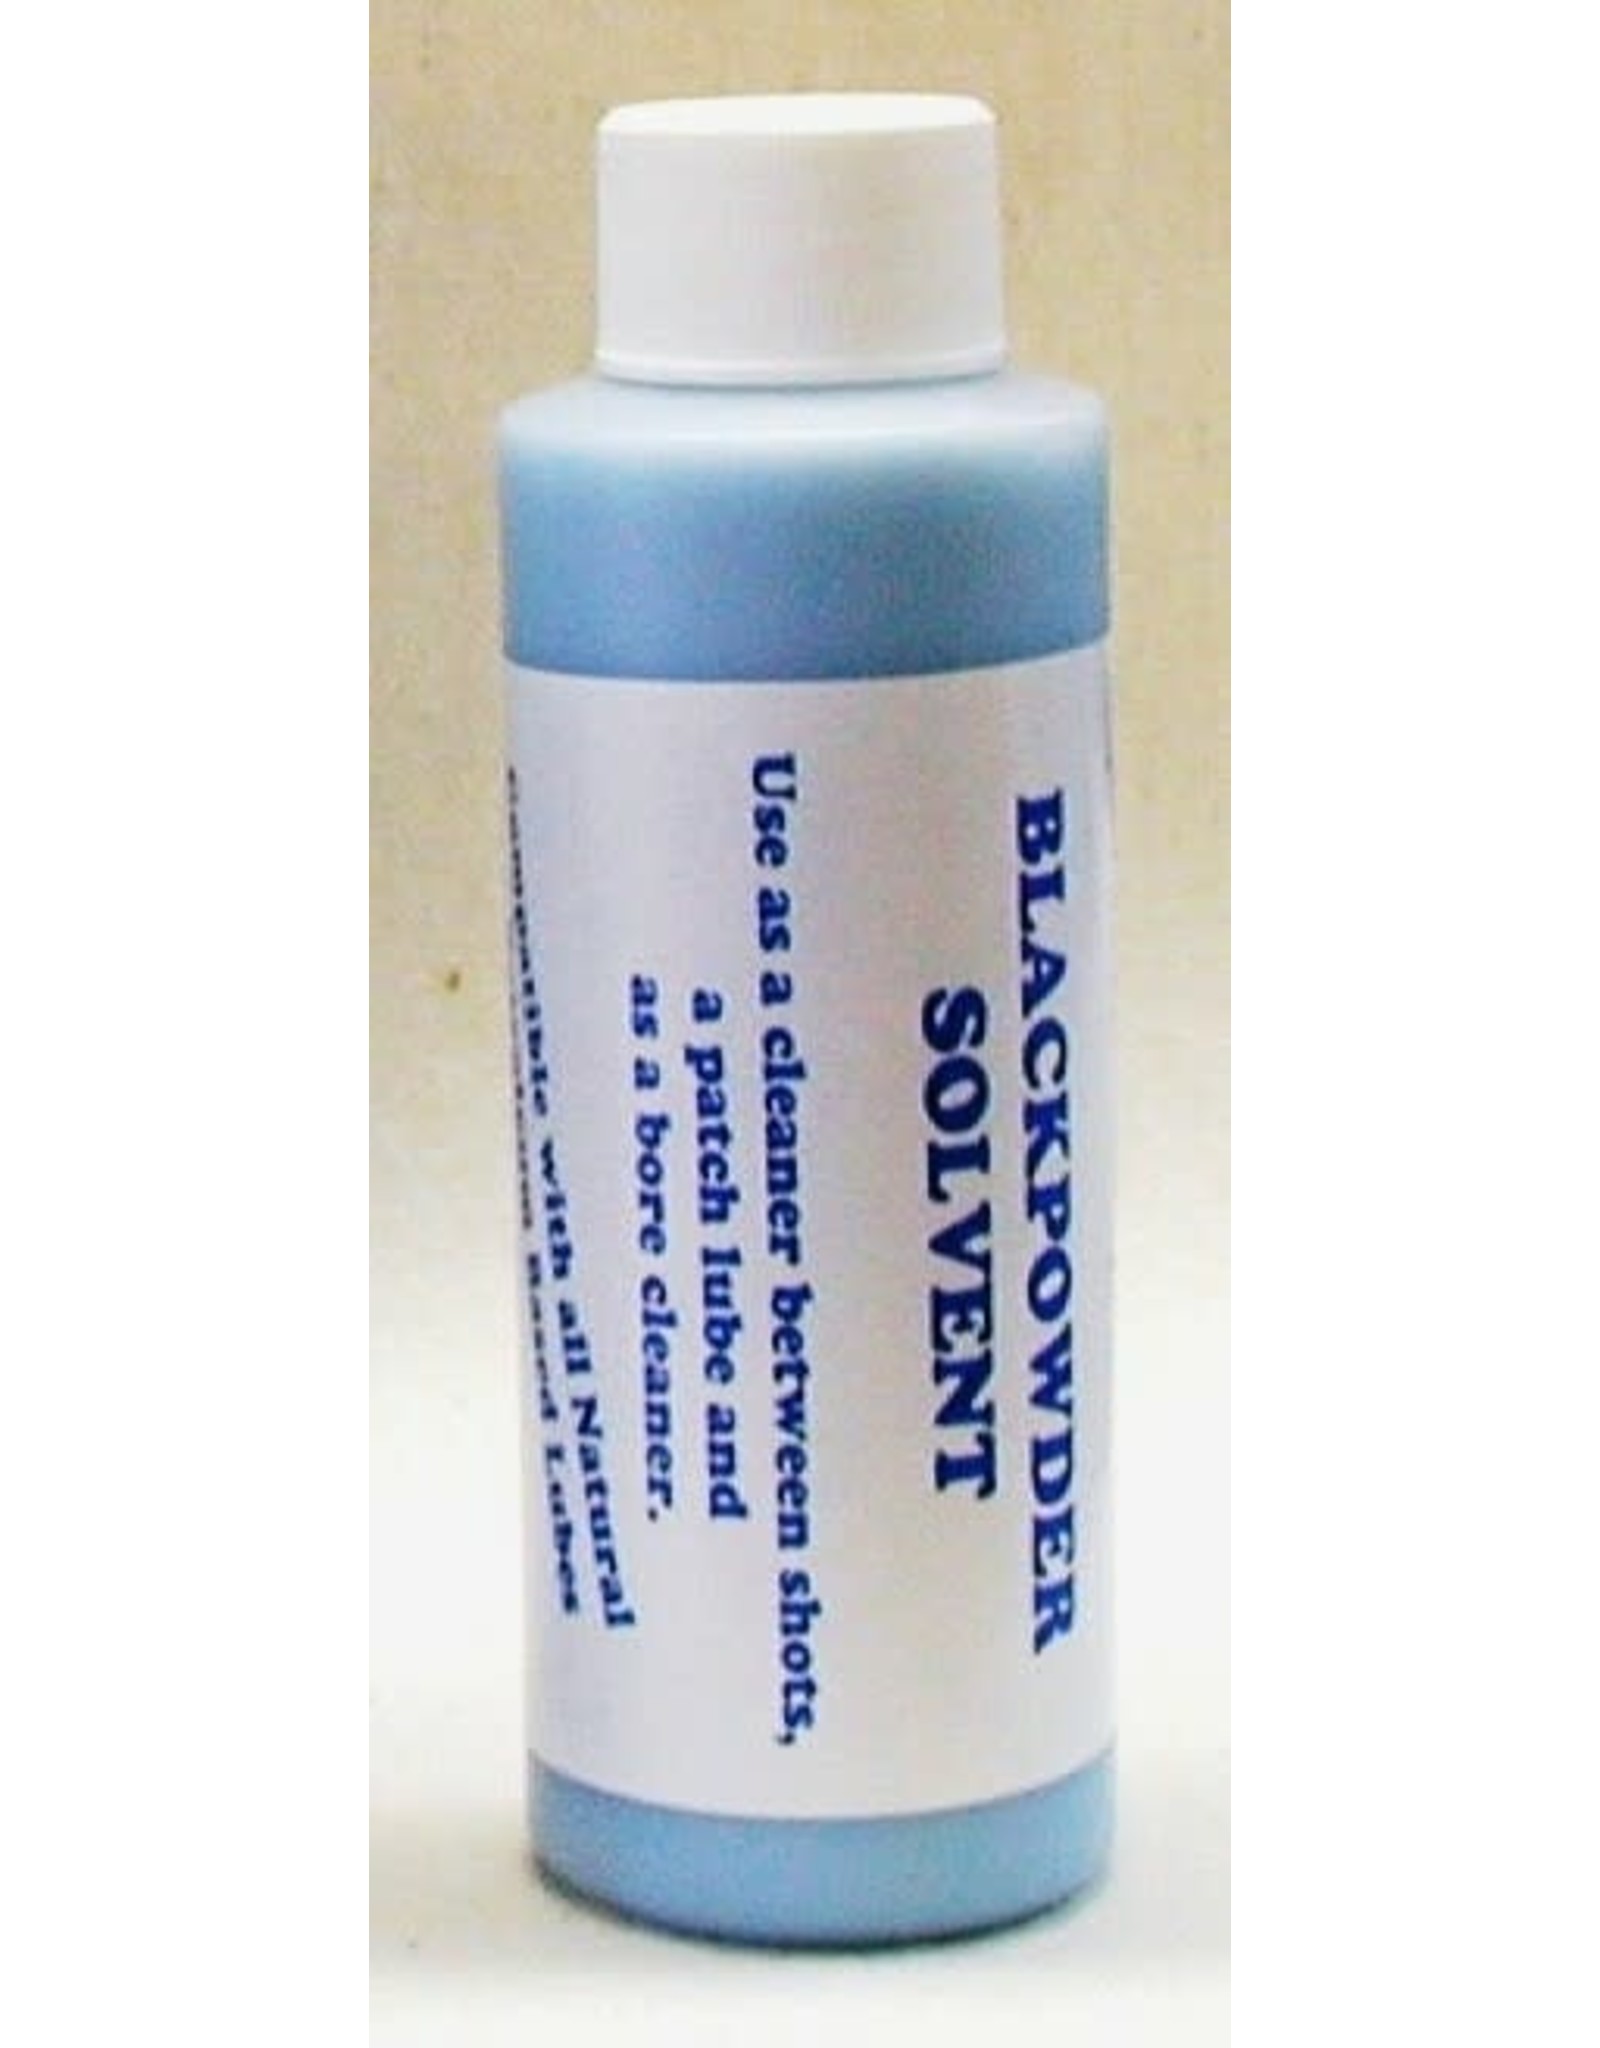 October Country Blue Thunder Solvent & Lube - 4 Oz